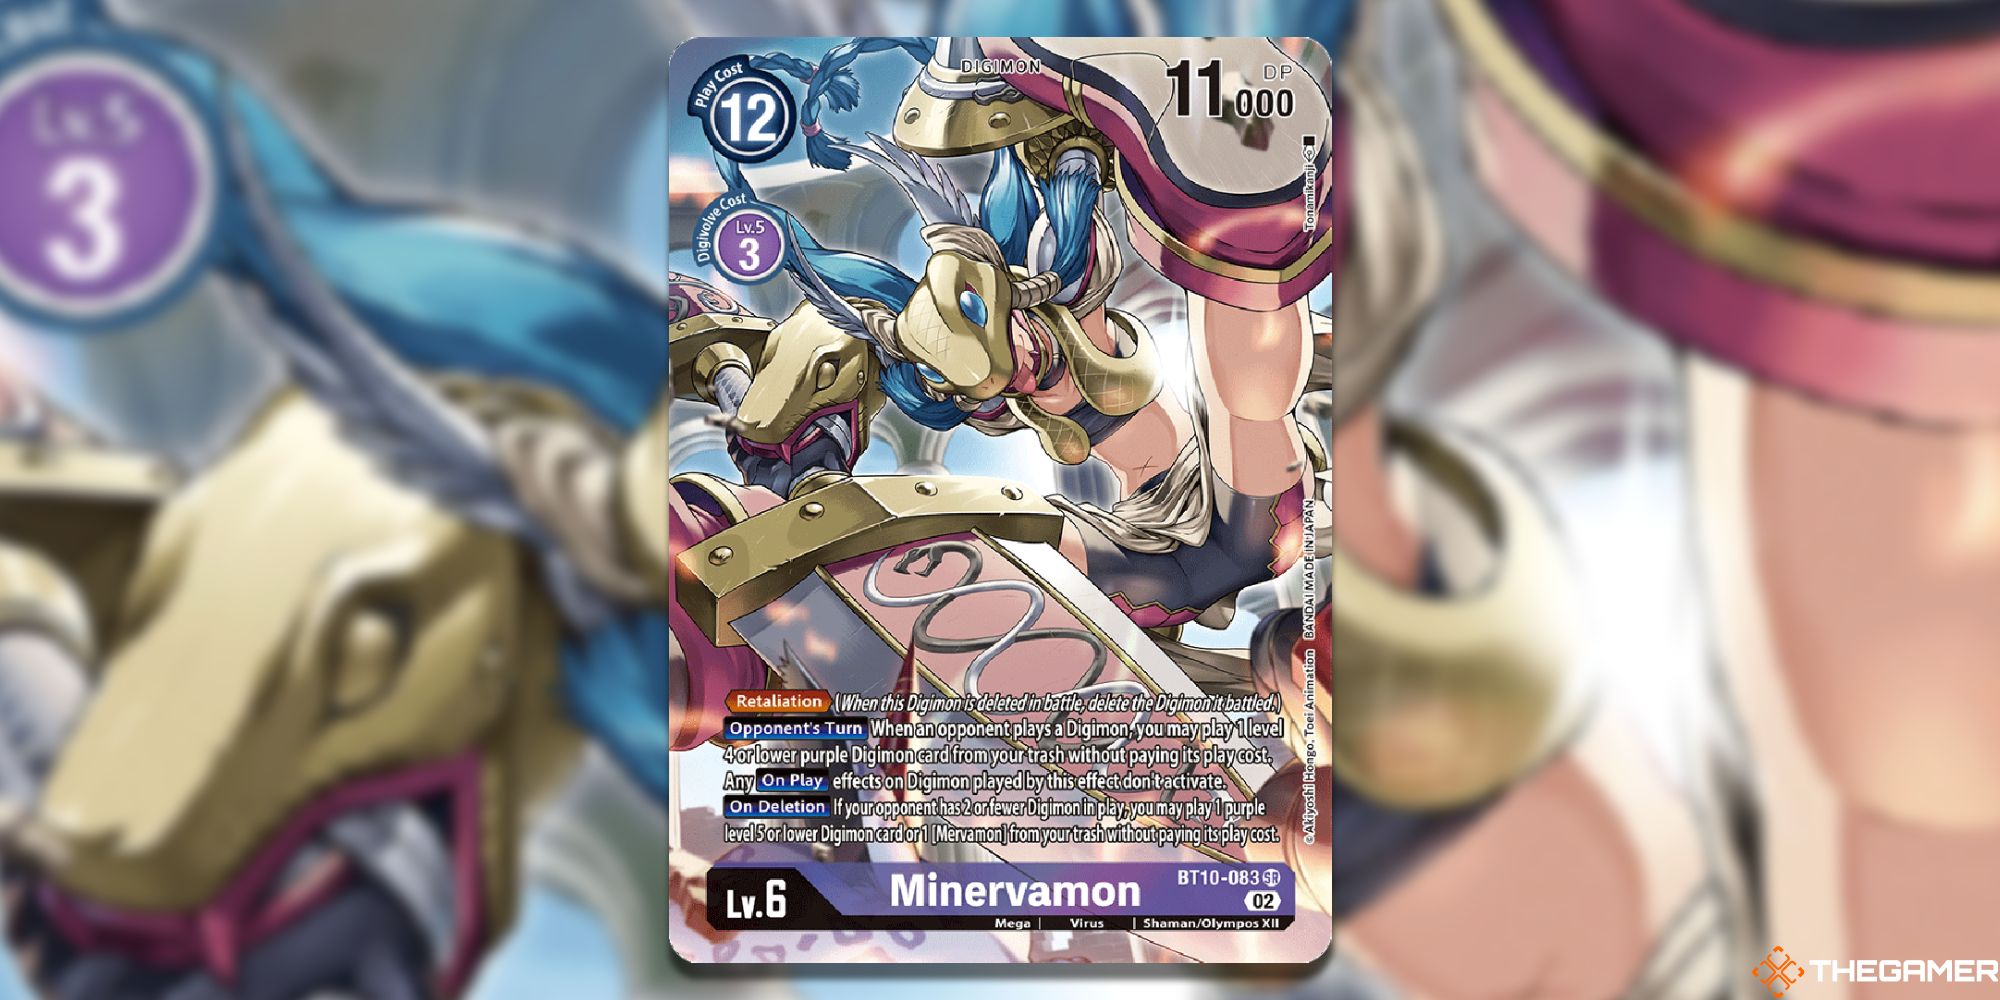 minervamon alt  card from digimon card game with blur background